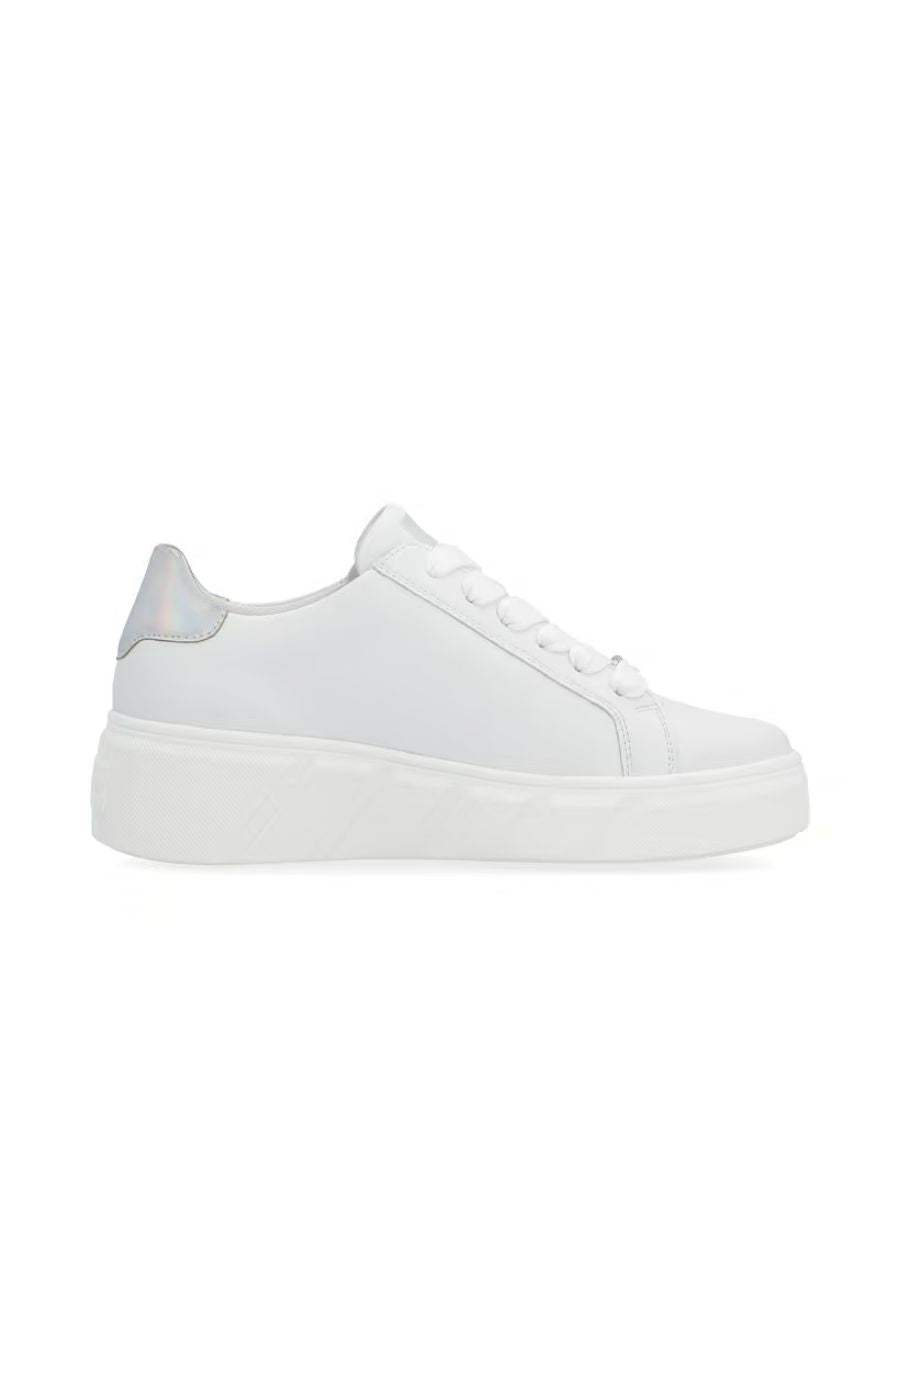 Rieker Trainer in White With Silver